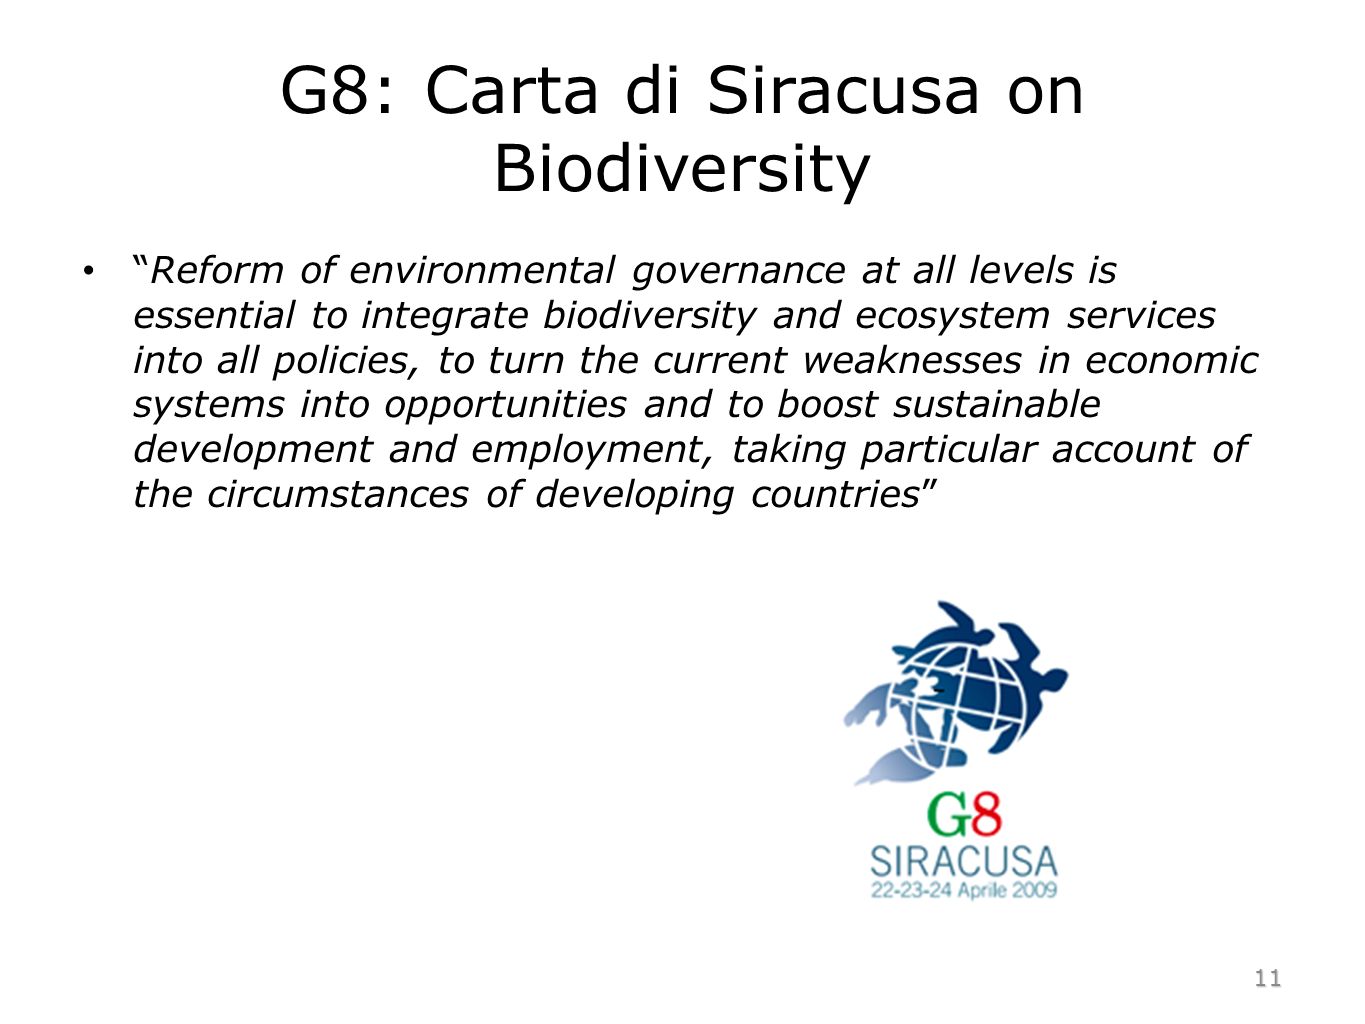 G8: Carta di Siracusa on Biodiversity Reform of environmental governance at all levels is essential to integrate biodiversity and ecosystem services into all policies, to turn the current weaknesses in economic systems into opportunities and to boost sustainable development and employment, taking particular account of the circumstances of developing countries 11